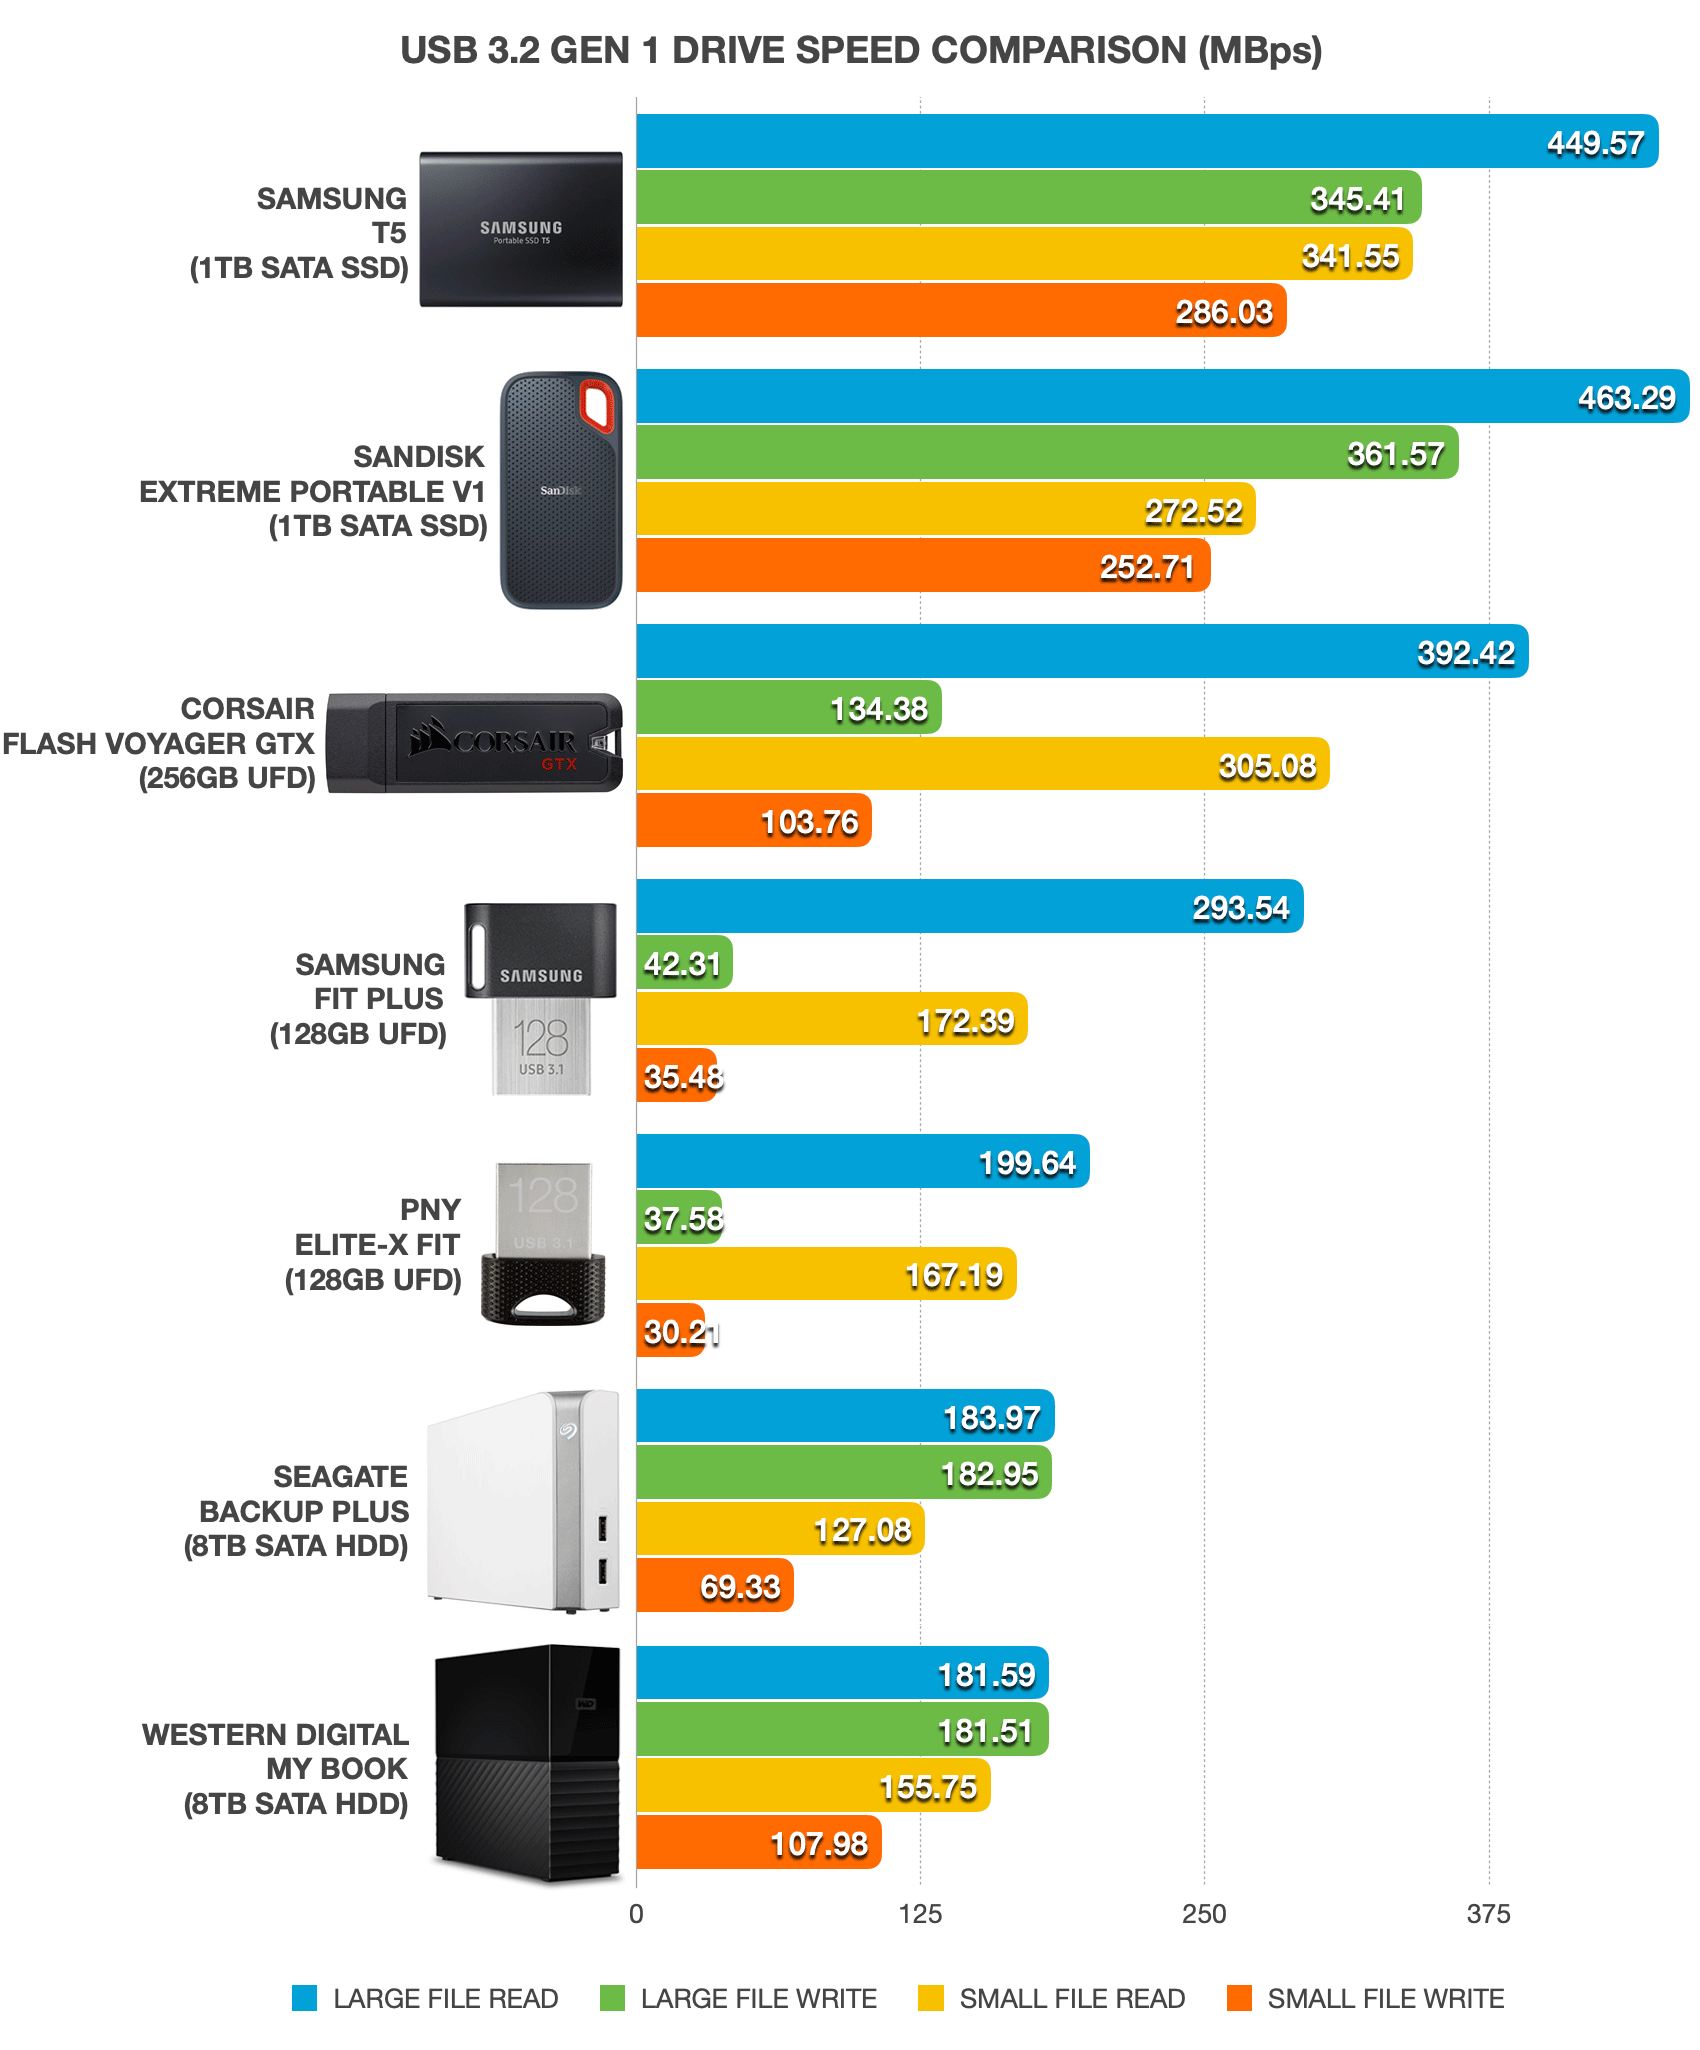 Bar chart showing performance of different brands of USB 3.2 Gen 1 SSDs, thumb drives, and hard drives.